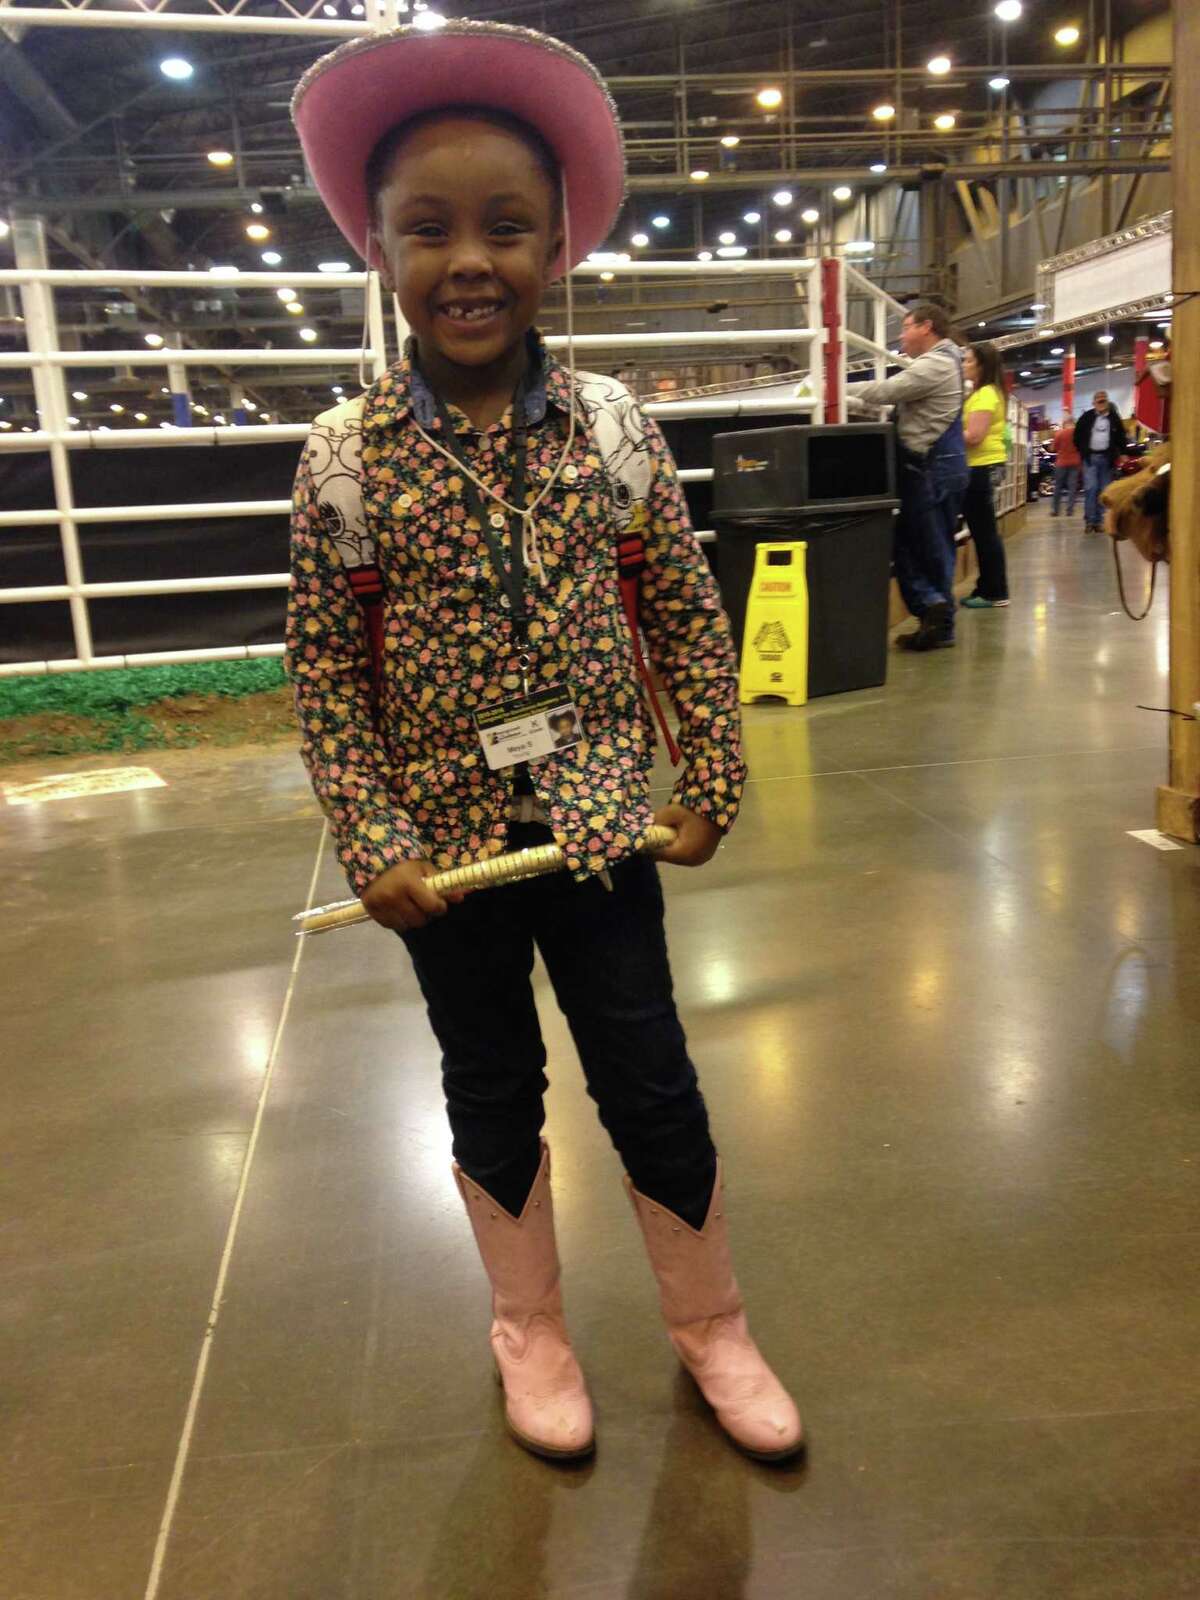 Meya Young, 6, at the Houston Livestock Show and Rodeo on Thursday, March 3, 2016.